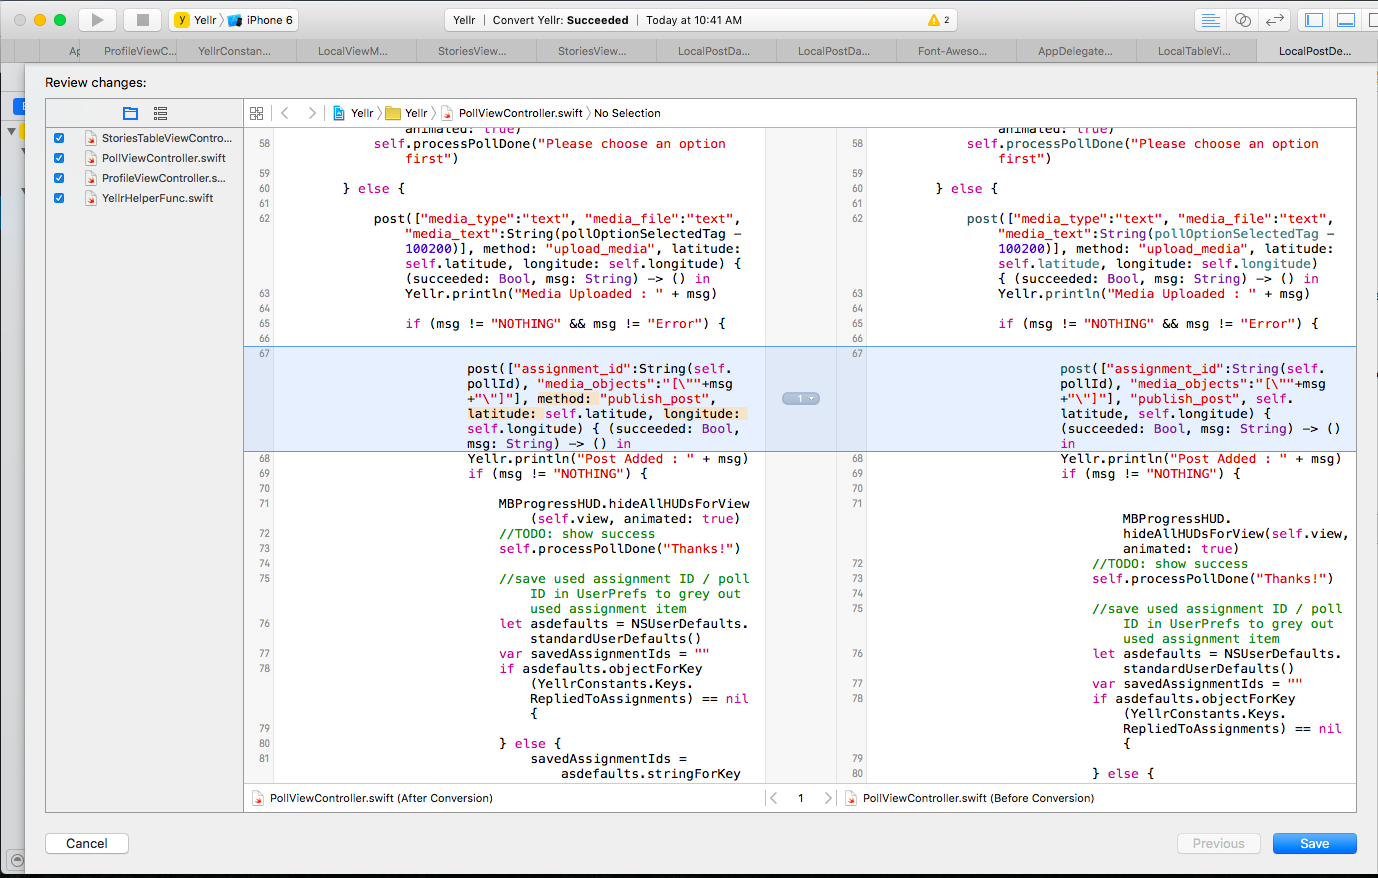 latest version of swift and xcode